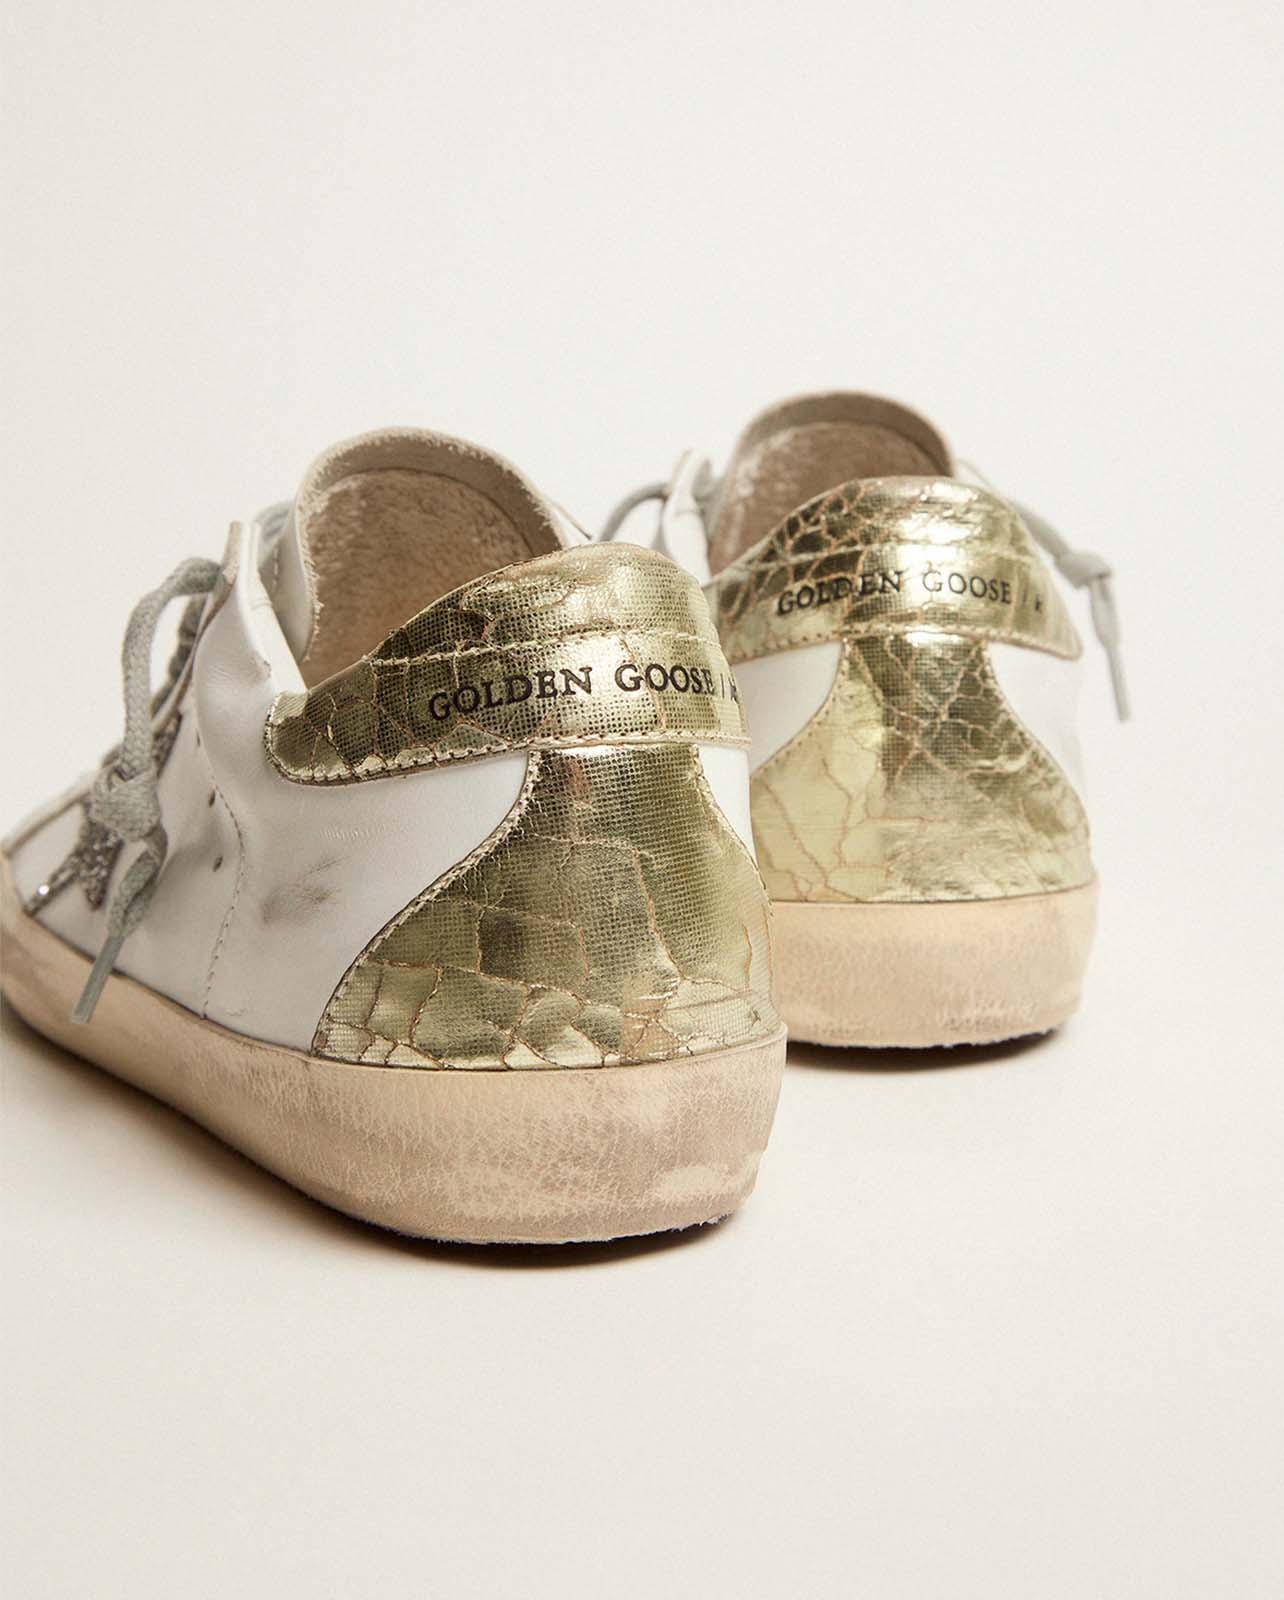 Close up photo of the back of a pair of Golden Goose sneakers